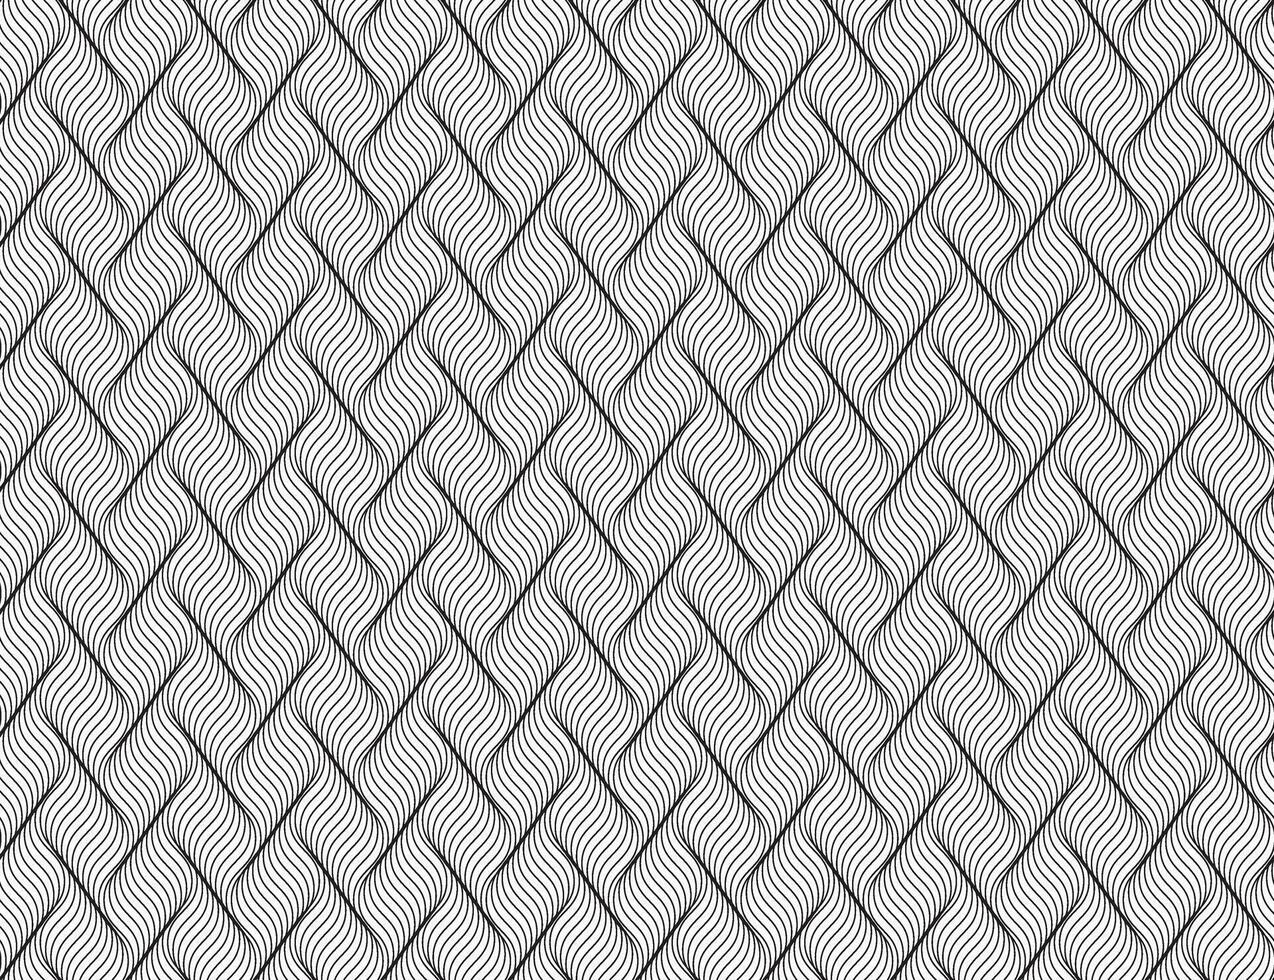 Abstratc background of swirle lines. Black and white line pattern with optical illusion effect. vector